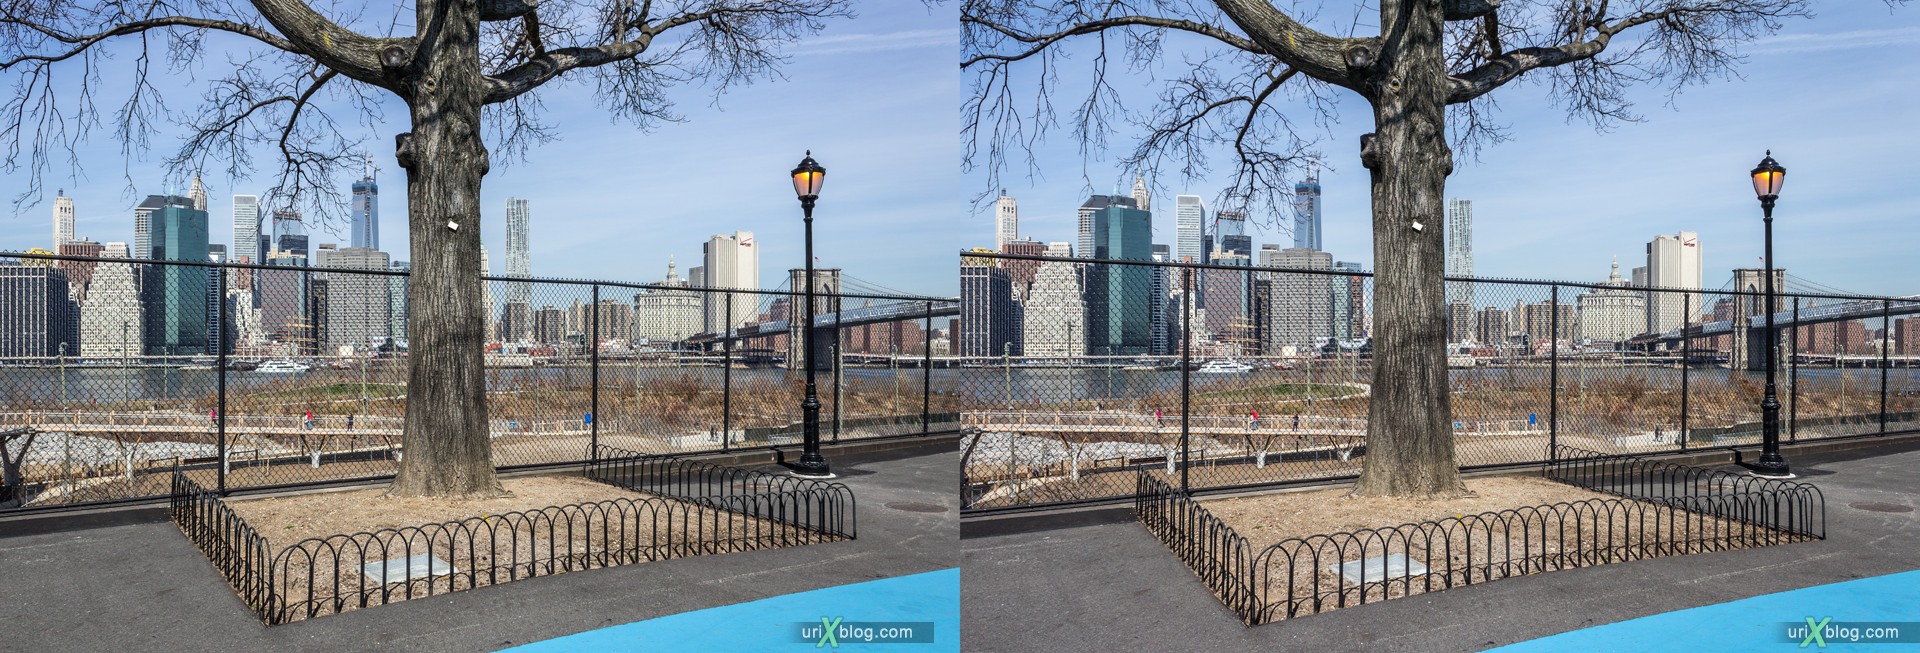 2013, Squibb park, Brooklyn, NYC, New York City, USA, 3D, stereo pair, cross-eyed, crossview, cross view stereo pair, stereoscopic